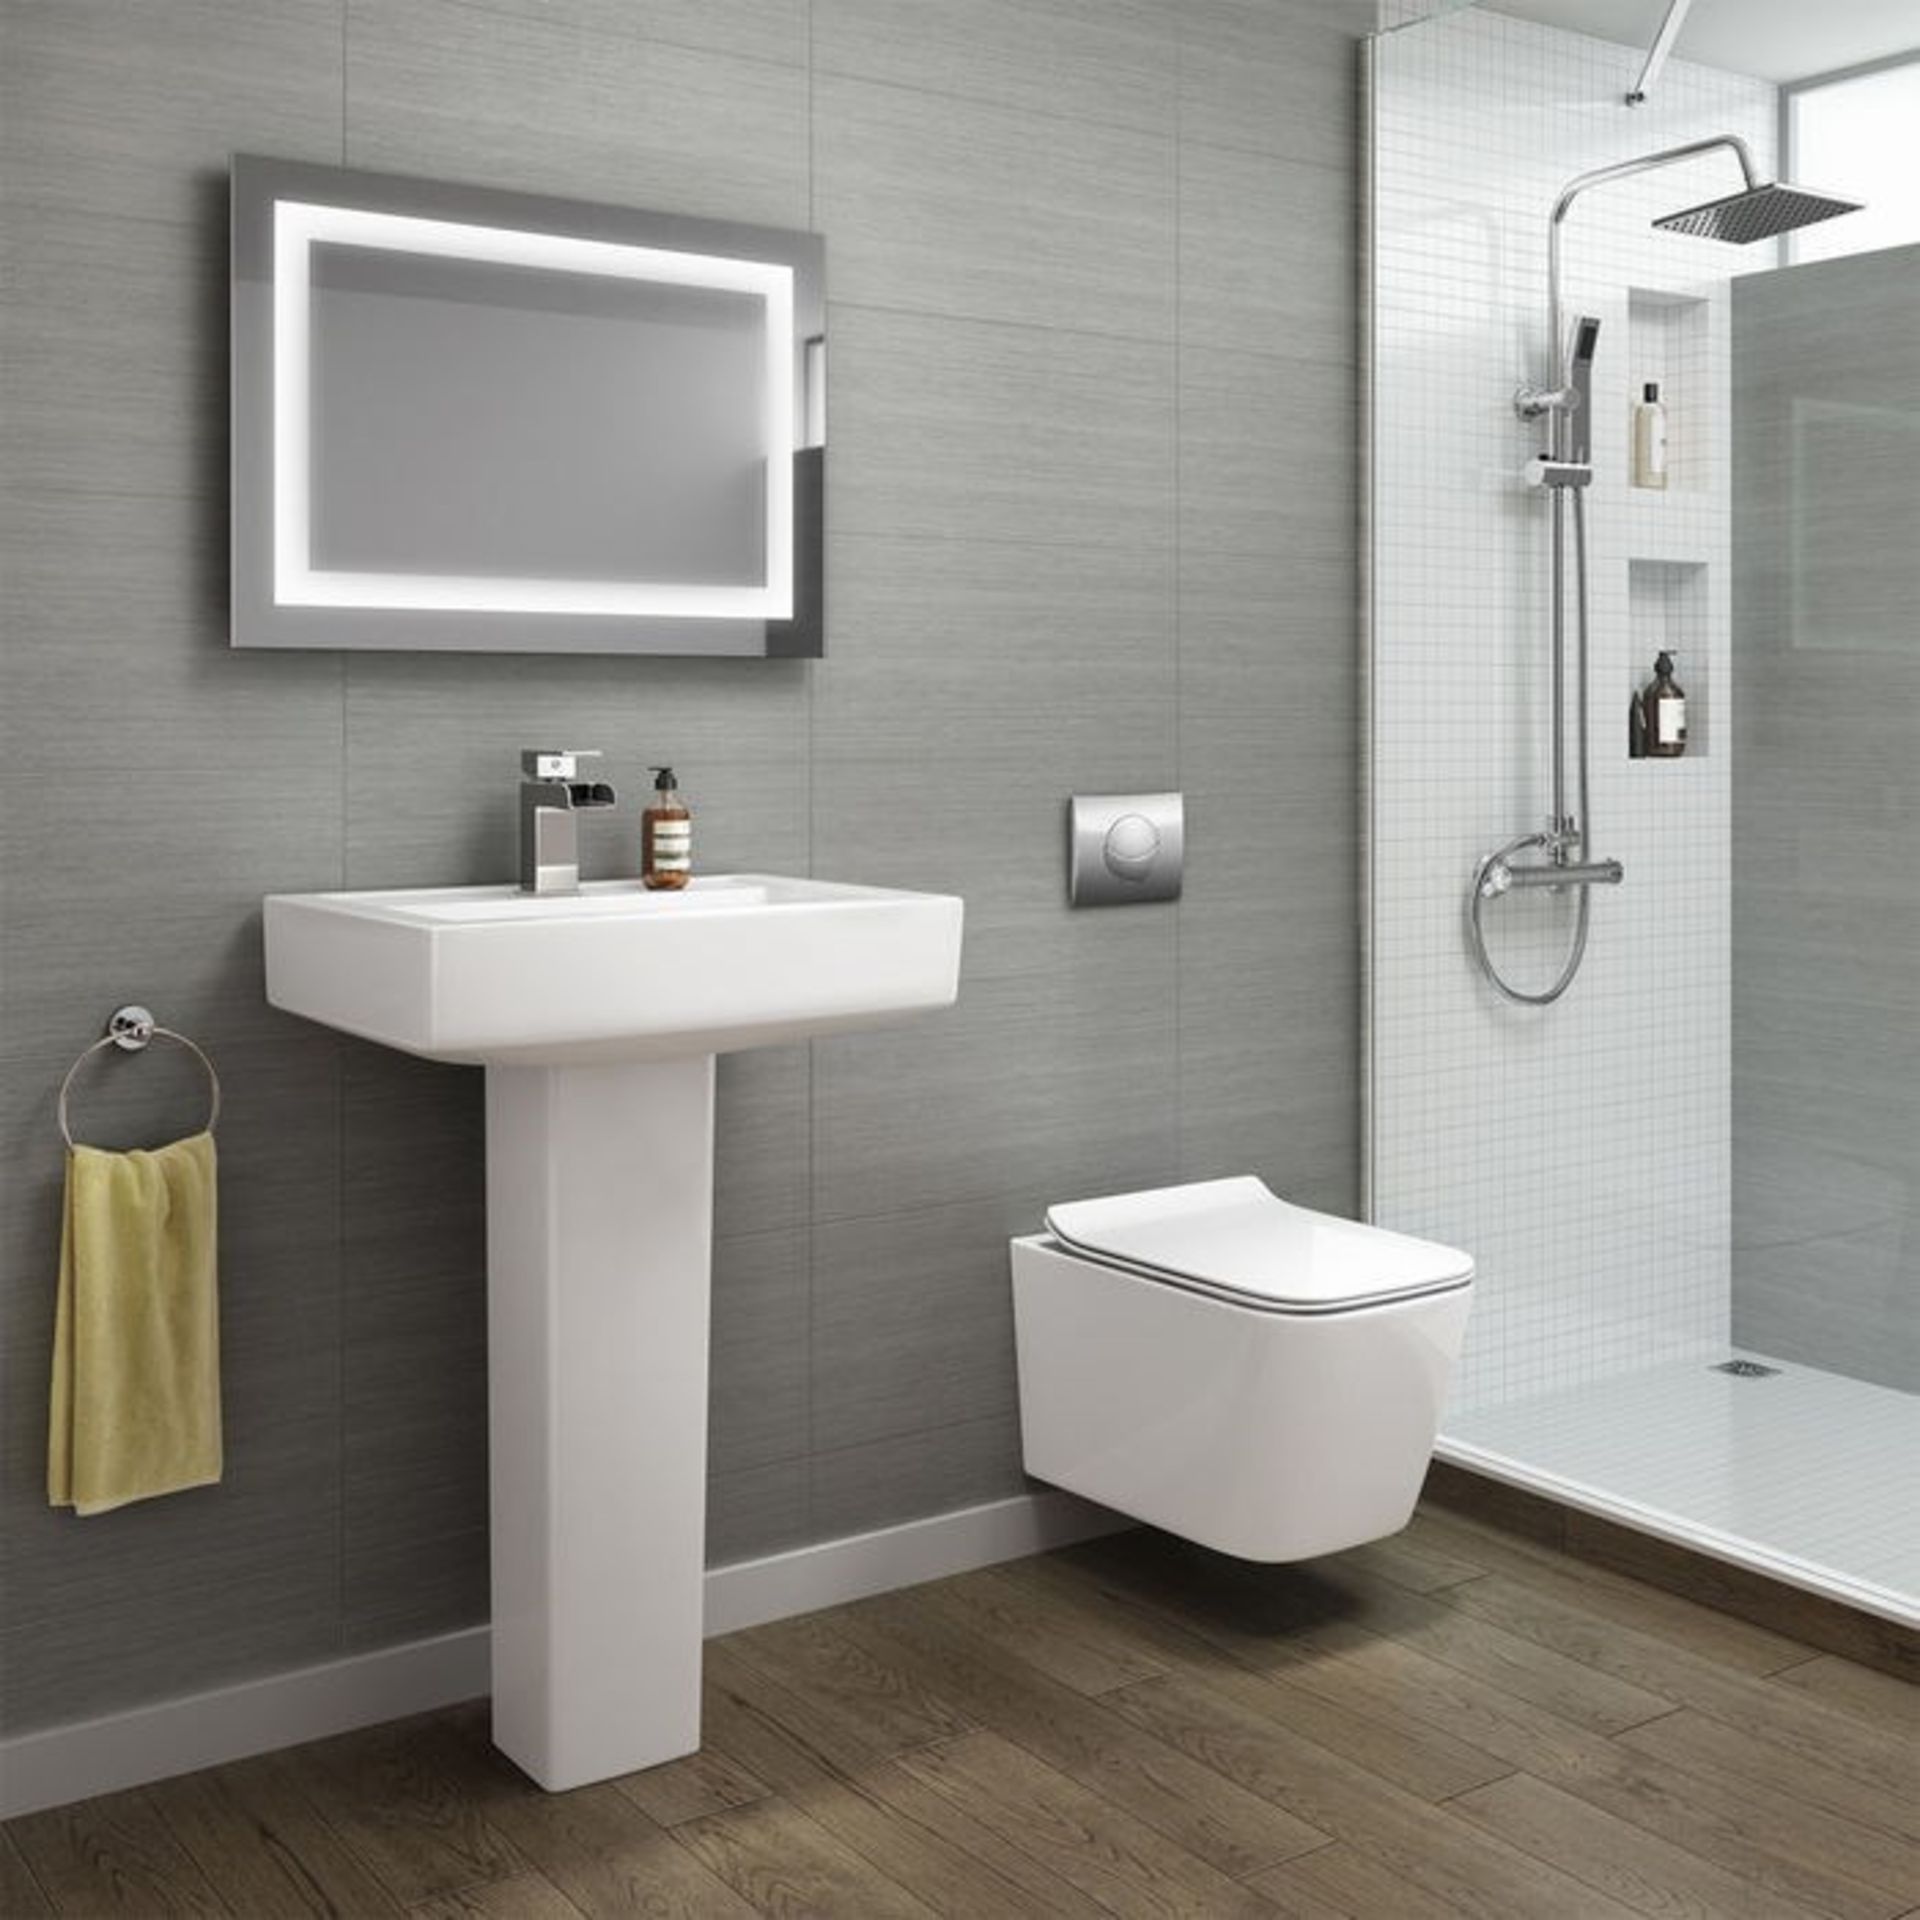 BRAND NEW BOXED 660mm Harper Gloss Grey Basin Vanity Unit - Floor Standing. RRP £749.99.COMES ... - Image 2 of 4